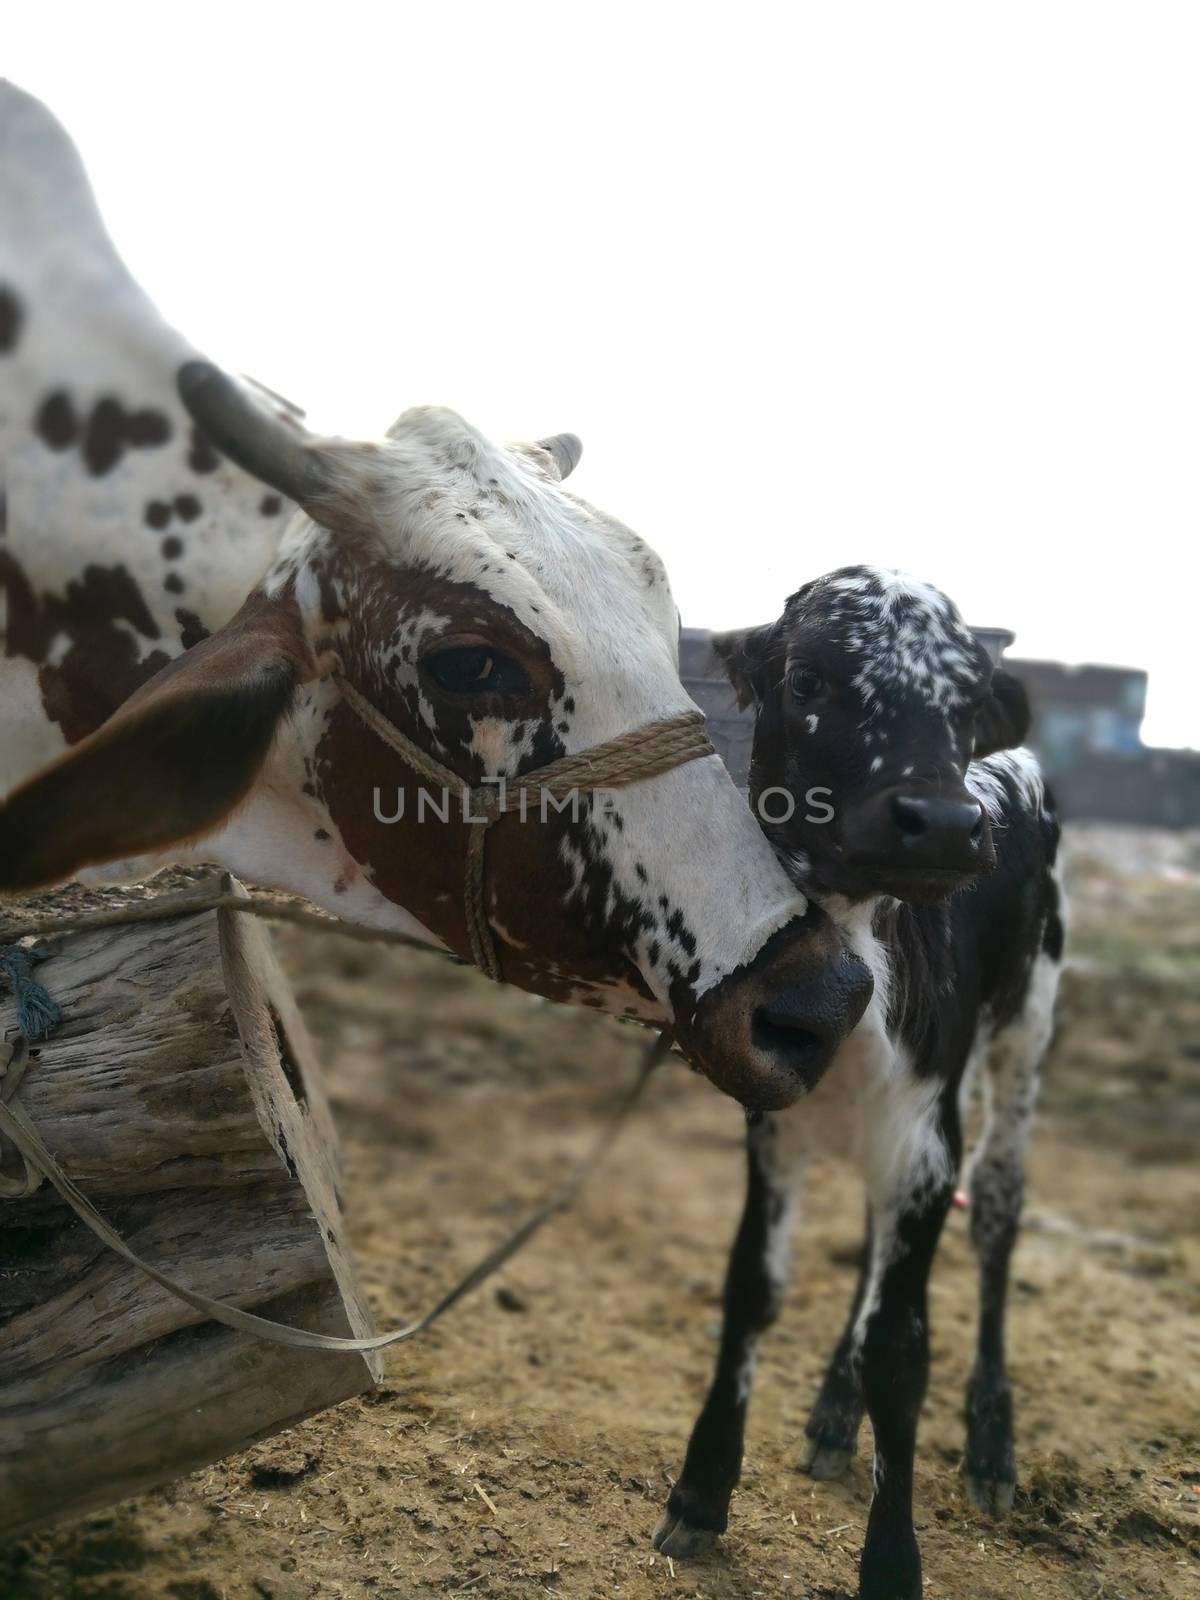 Beautiful Baby Calf with his Mother Cow by shahiddzn